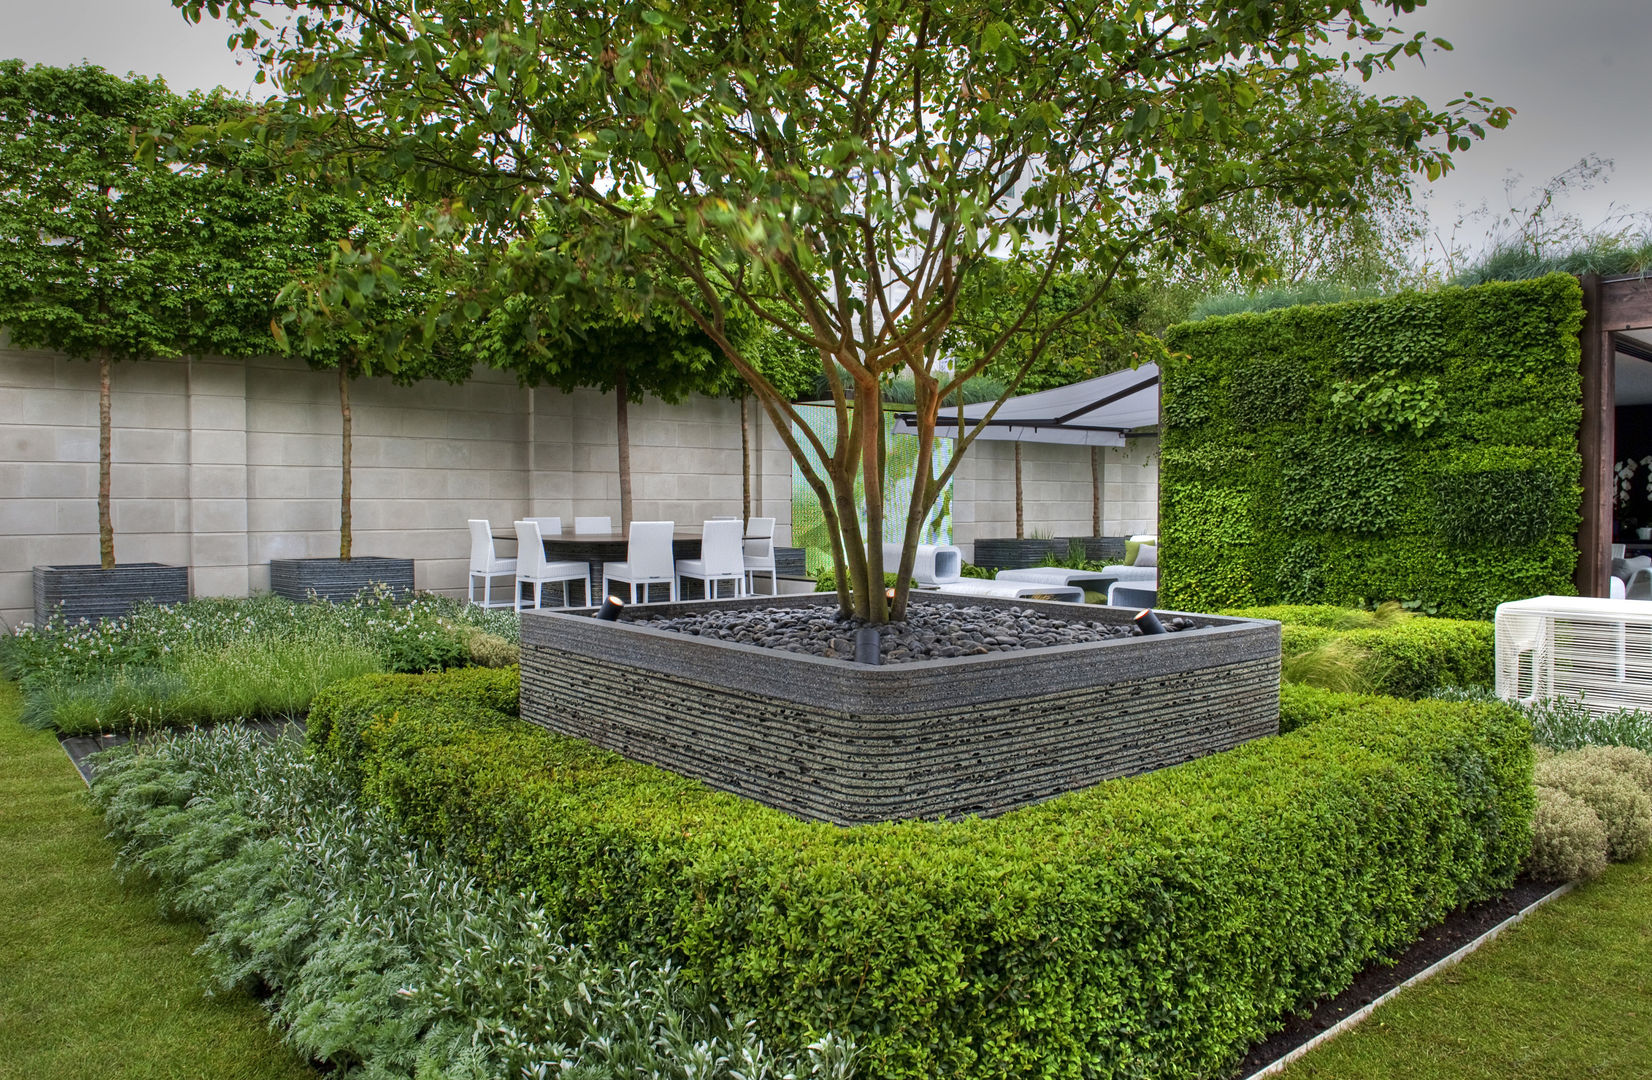 Chelsea Flower Show 2012 : The Rootop Workplace of Tomorrow Aralia Commercial spaces Stone Office buildings